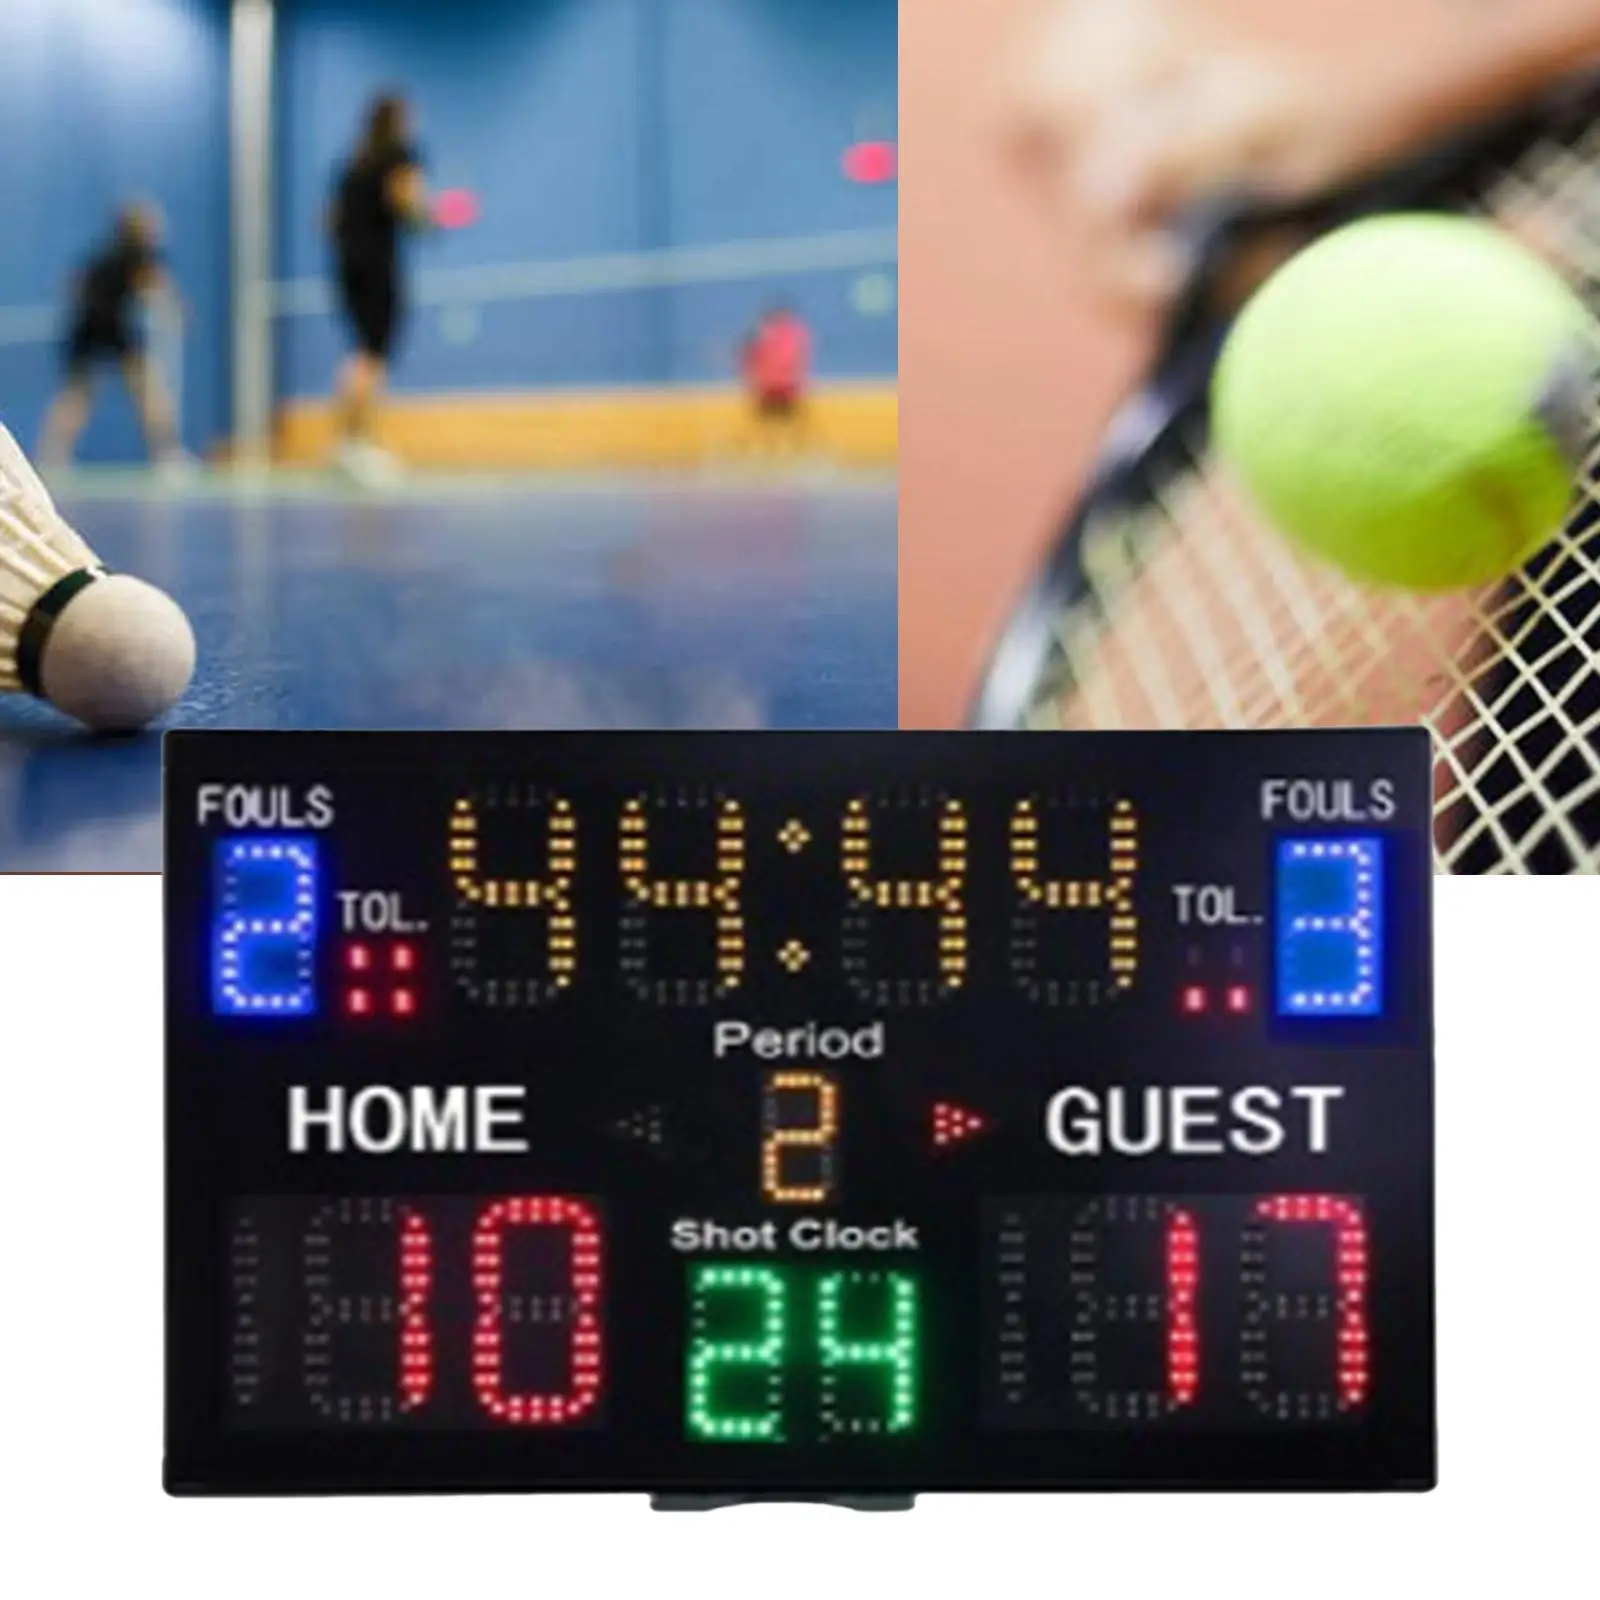 Professional Indoor Basketball Scoreboard Score Wall Hanging Remote Control Electronic Scoreboard for Volleyball Sports